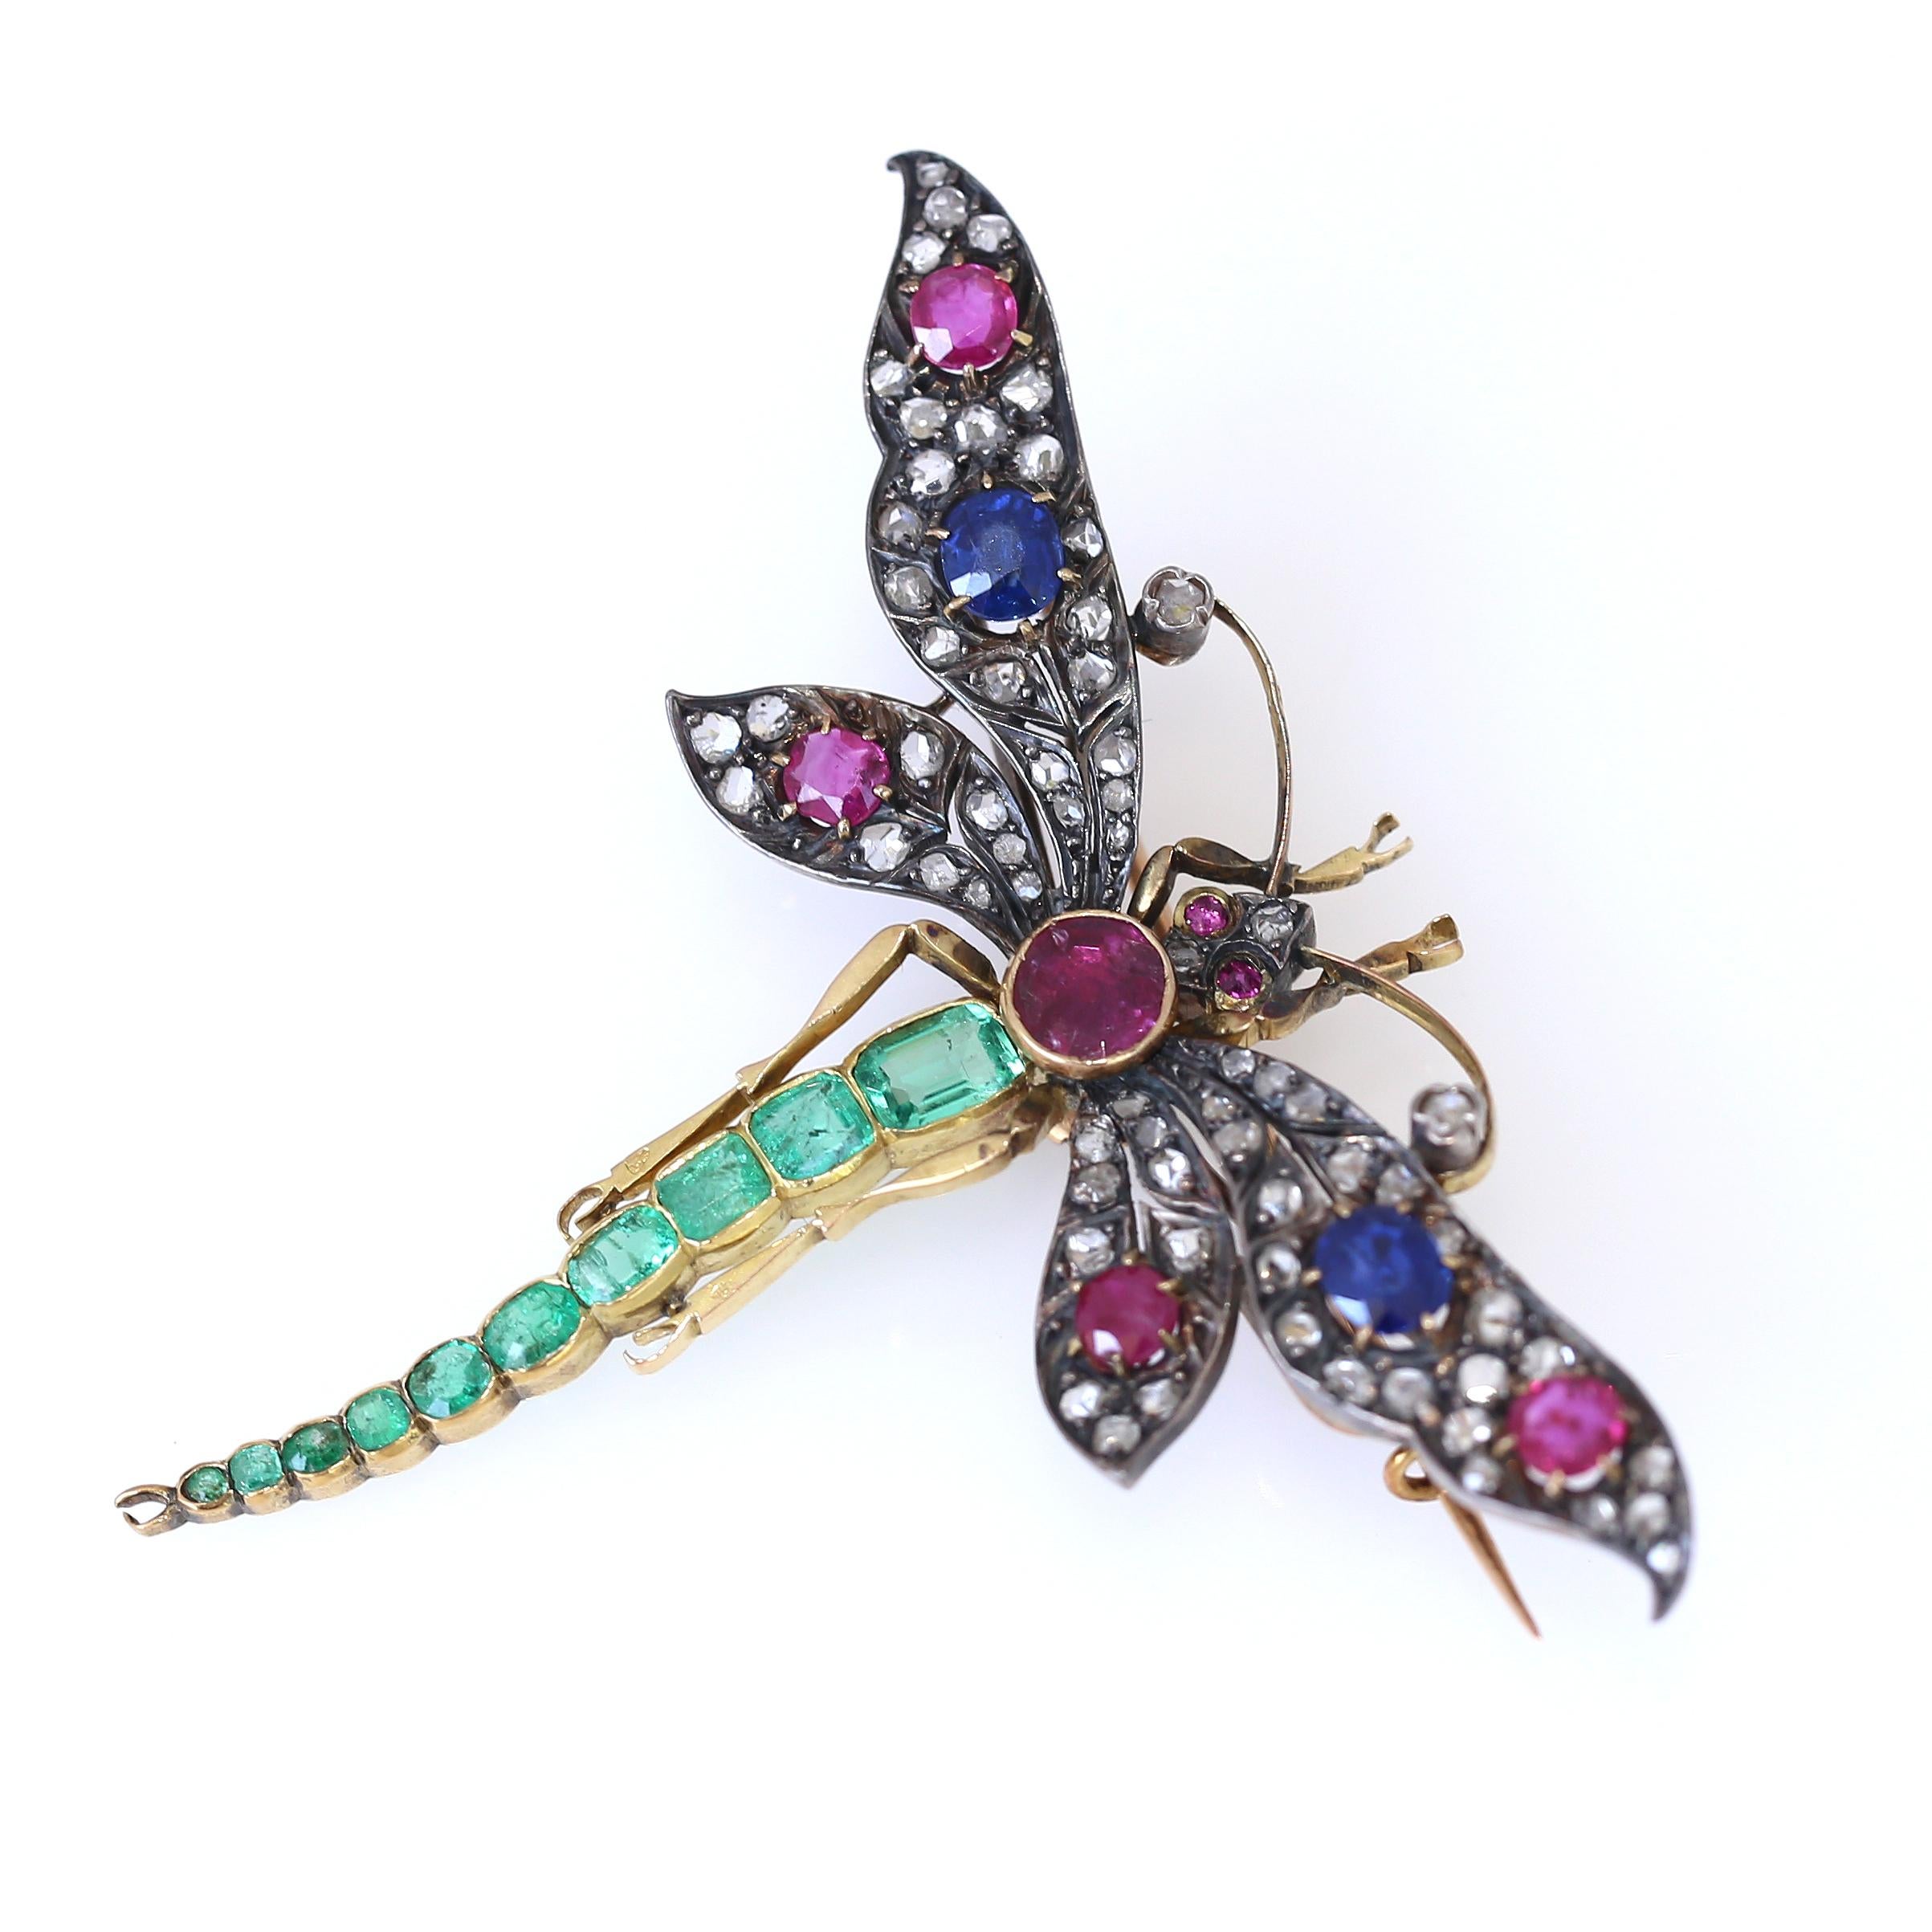 Huge Dragonfly Brooch (pin) comprising of fine Emeralds degrading in size from the body to the tail. Five Oval shaped Rubies and Sapphires have decorated the wings with old-cut Diamonds. Marvelous design and execution. 
Victorian Period Style was